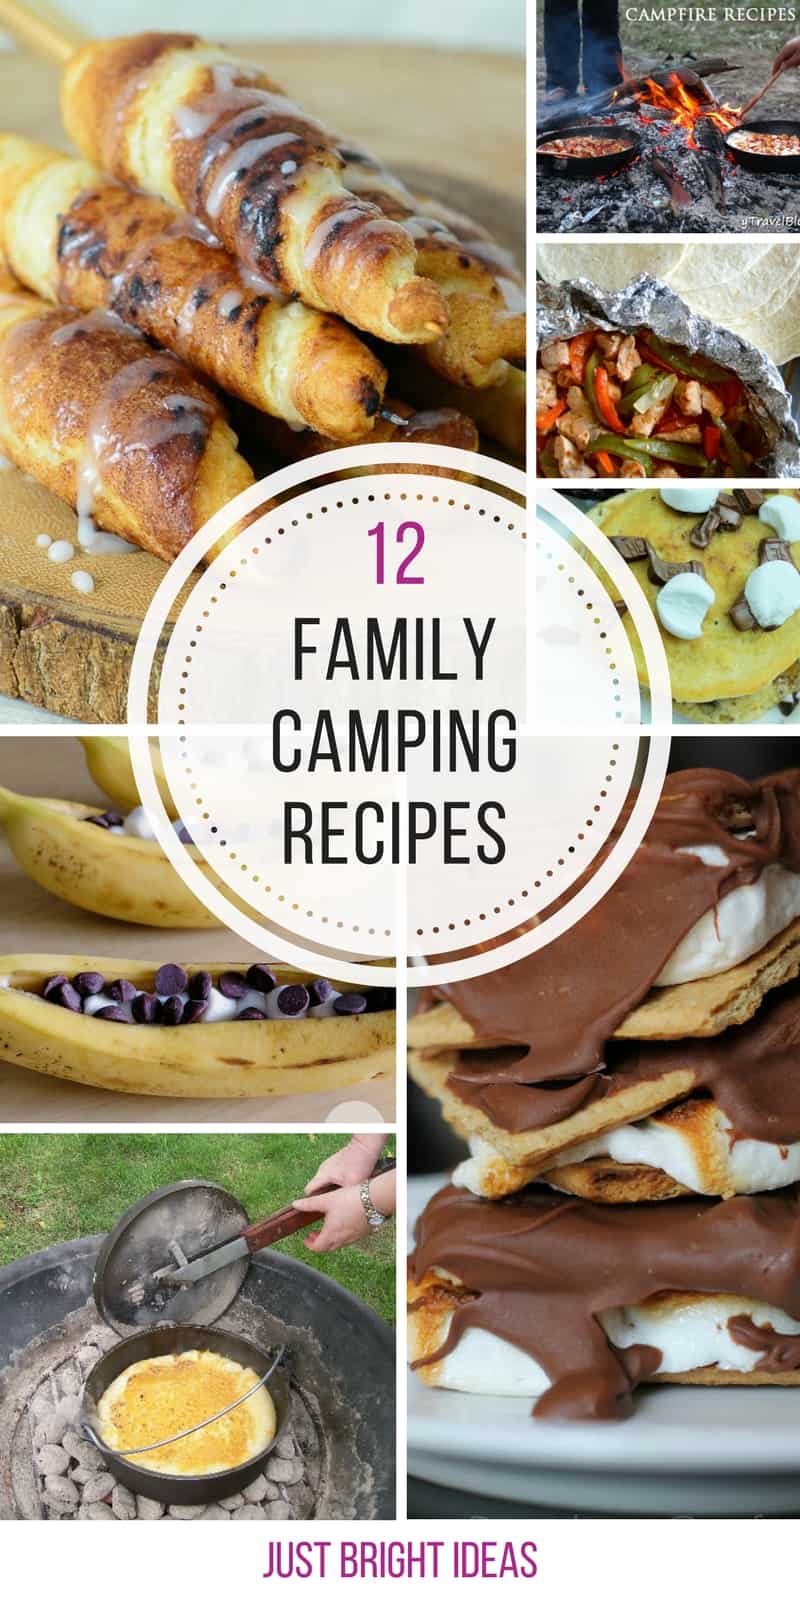 So many easy family camping recipes - can't wait to try those cinnamon rollups!